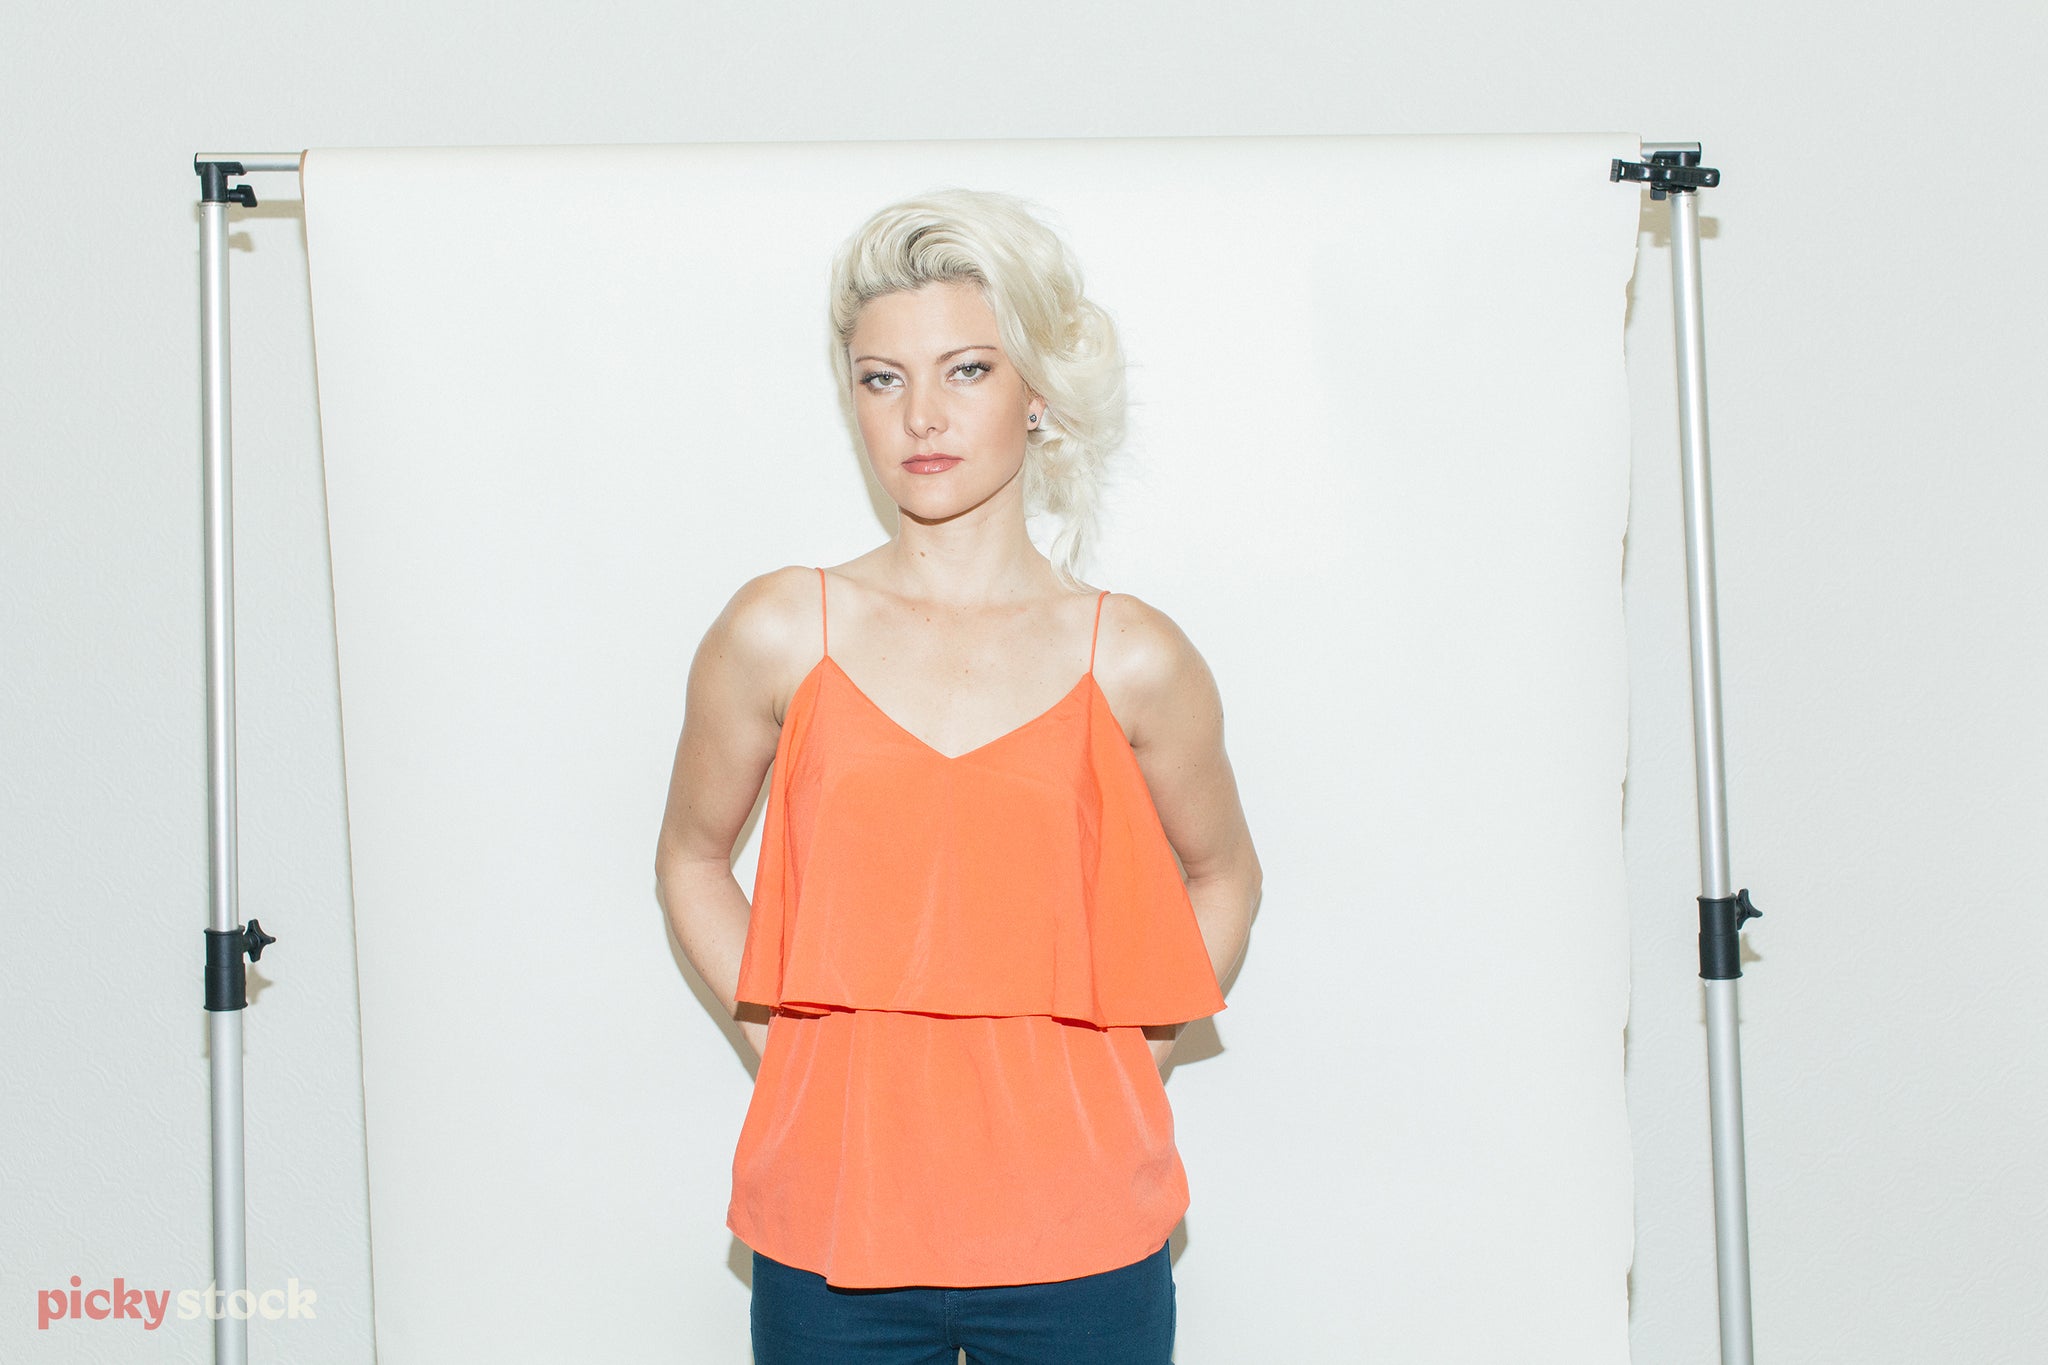 Lady with blonde Marilyn Munroe hair looks direct to camera. She wears a thin strapped orange top, and stands in front of a white photographic studio backdrop. 